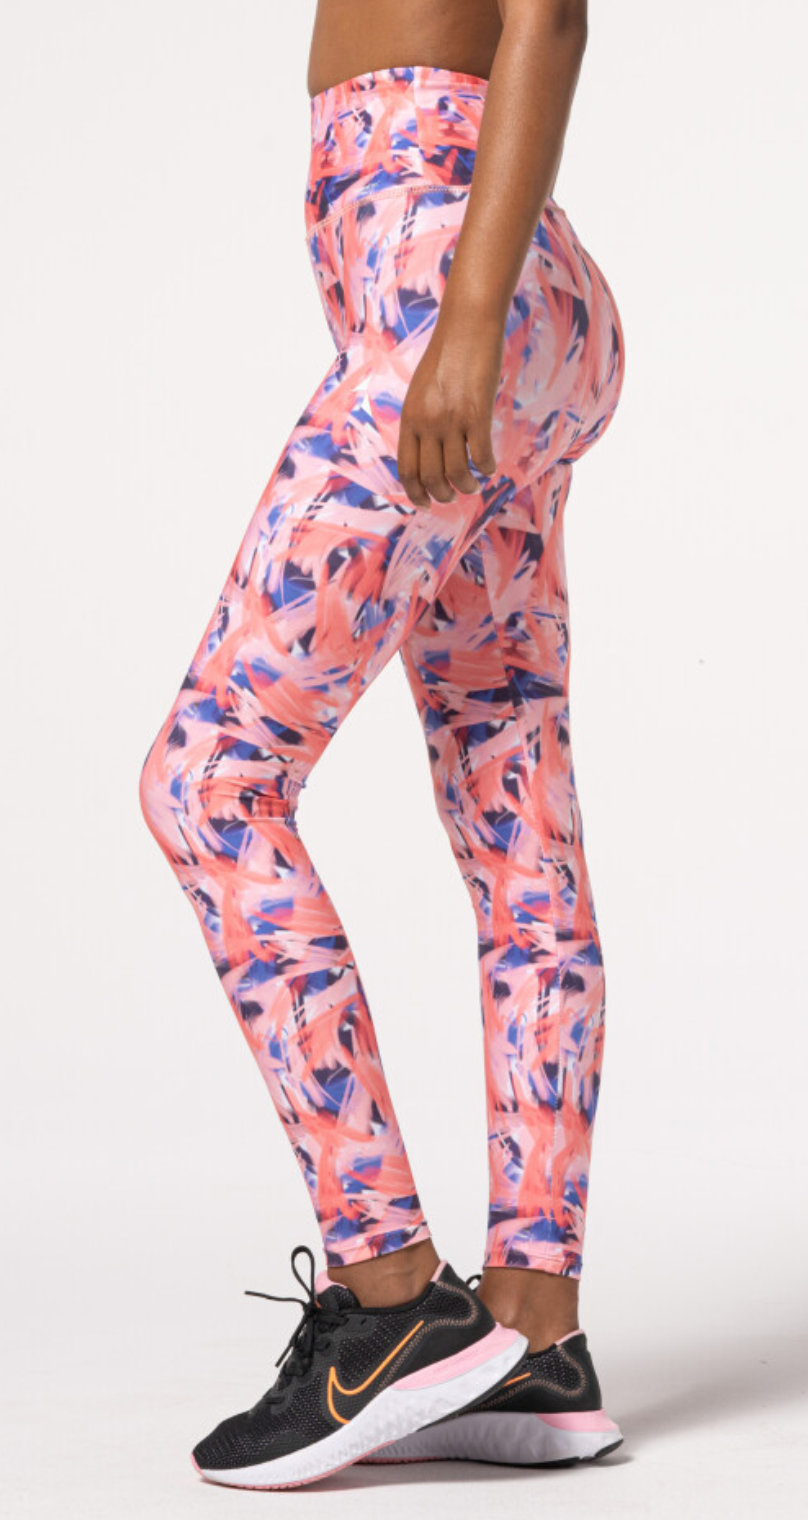 Carpatree Impression Print Leggings - High waisted white sports leggings with an abstract brush stroke style printed pattern in shades of pink, blue and lilac. Made of breathable quick drying thermoactive fabric these leggings have flat seams are soft and stretchy allowing you to train effectively and comfortably.